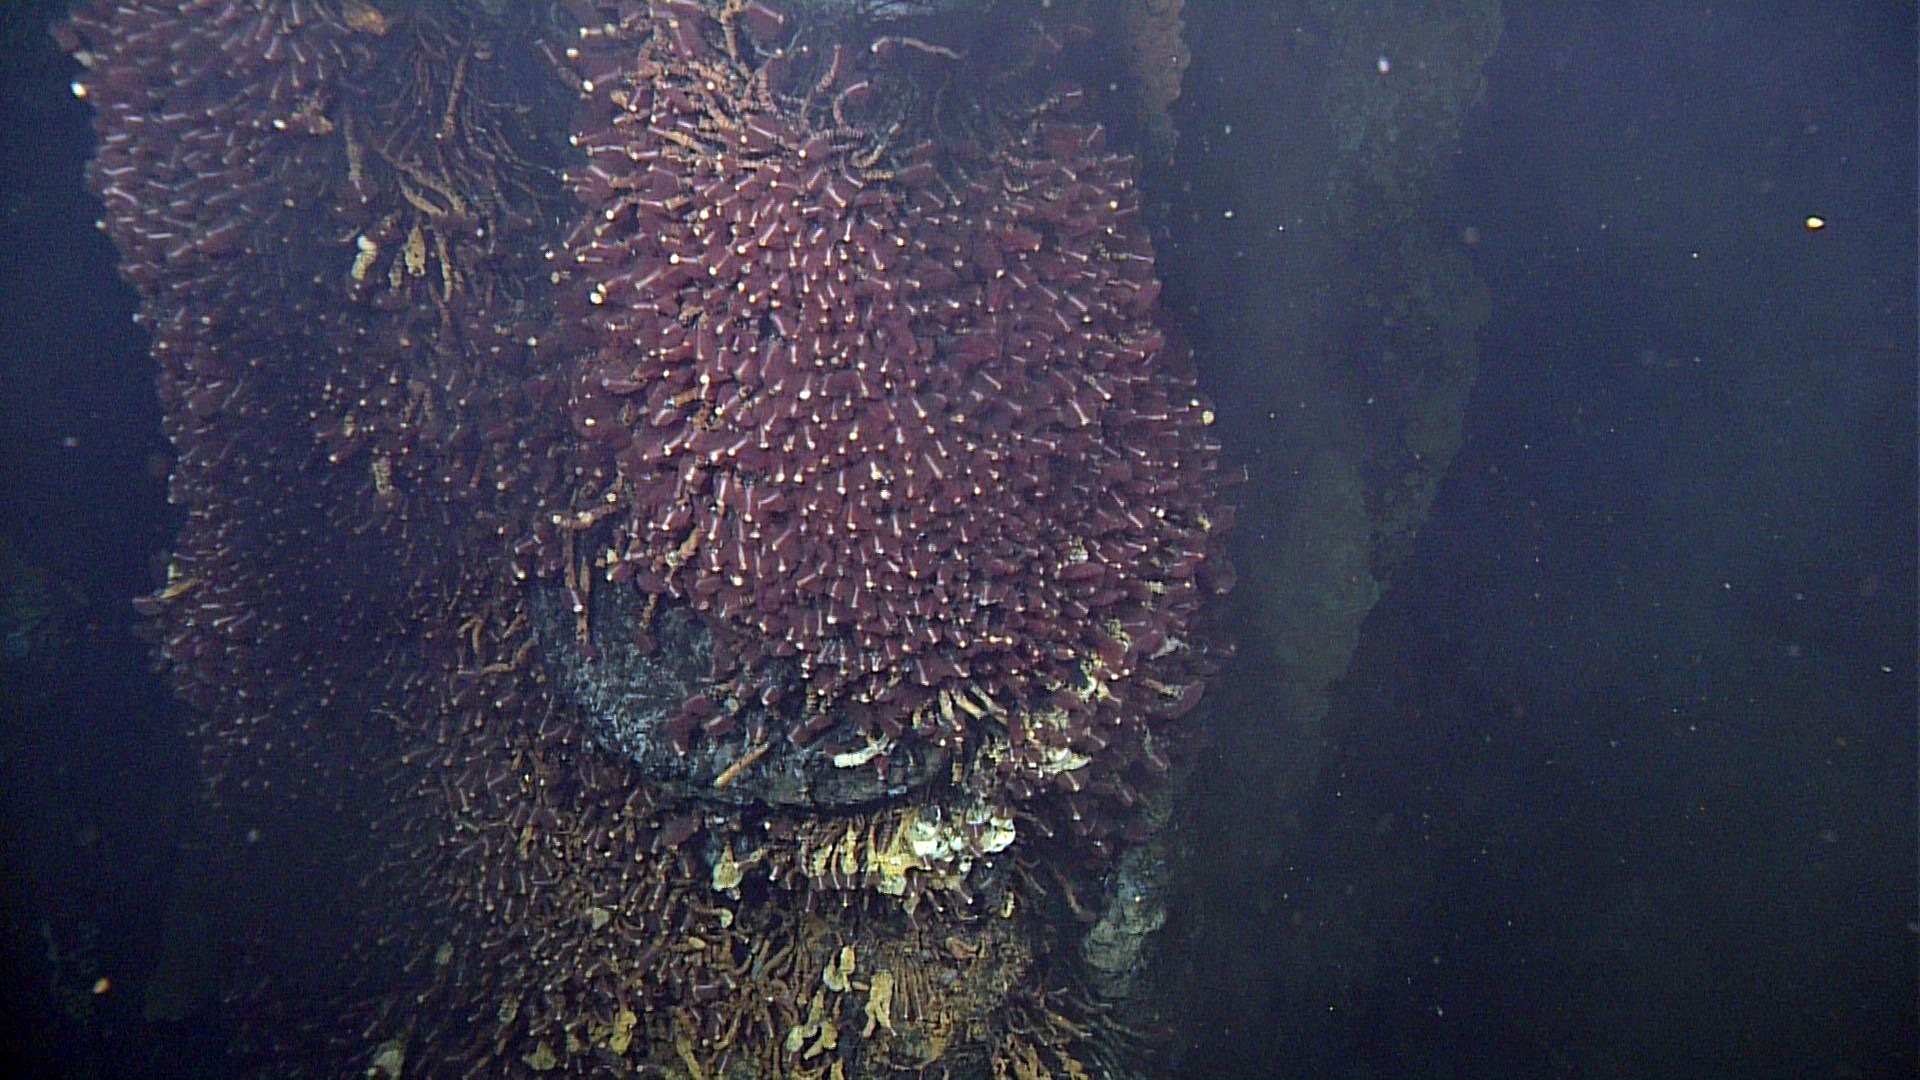 Tubeworms (Ridgeia) growing in a dense cluster on the side of a tall black smoker chimney. Palm worms (Paralvinella) were found above these tubeworms, closer to the vent orifice.